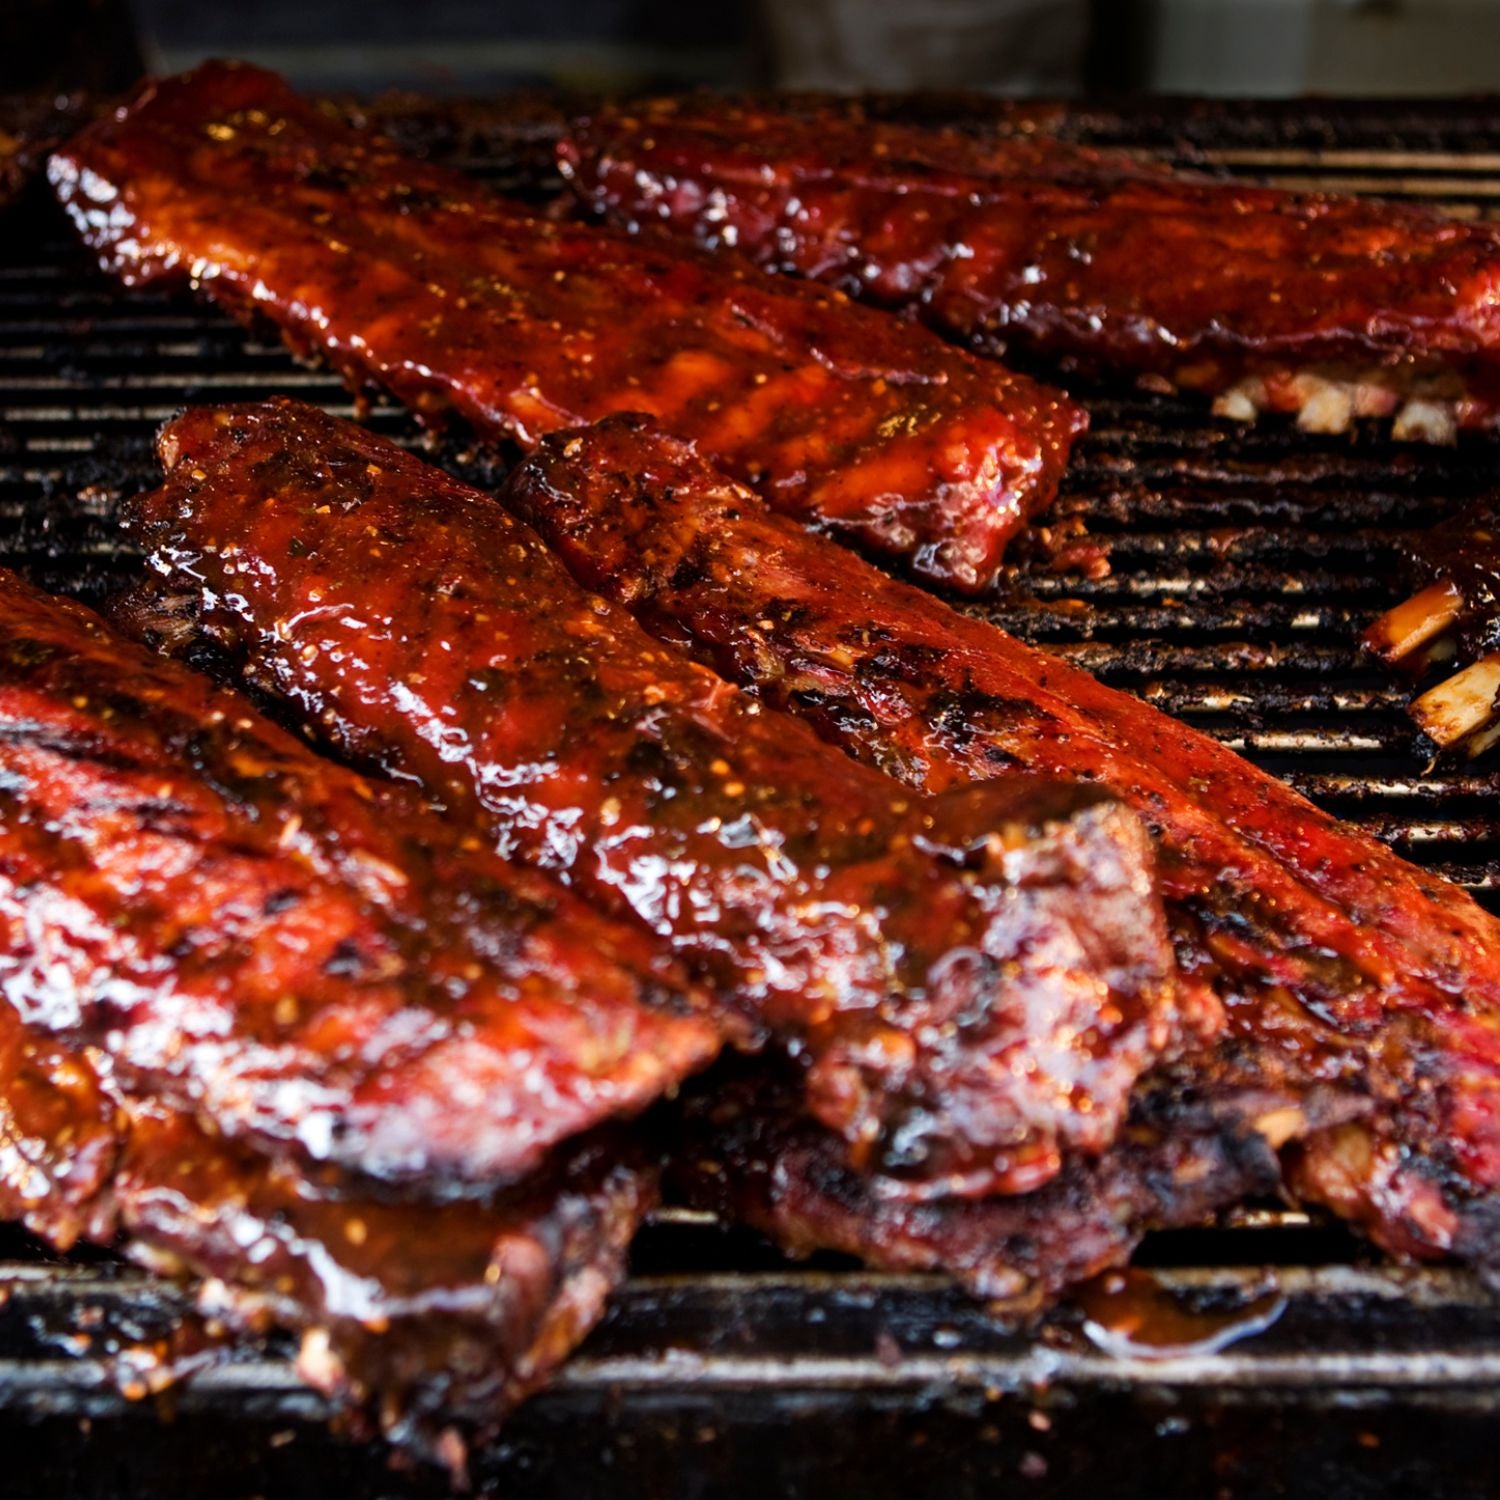 Juicy and flavorful BBQ ribs hot off the grill